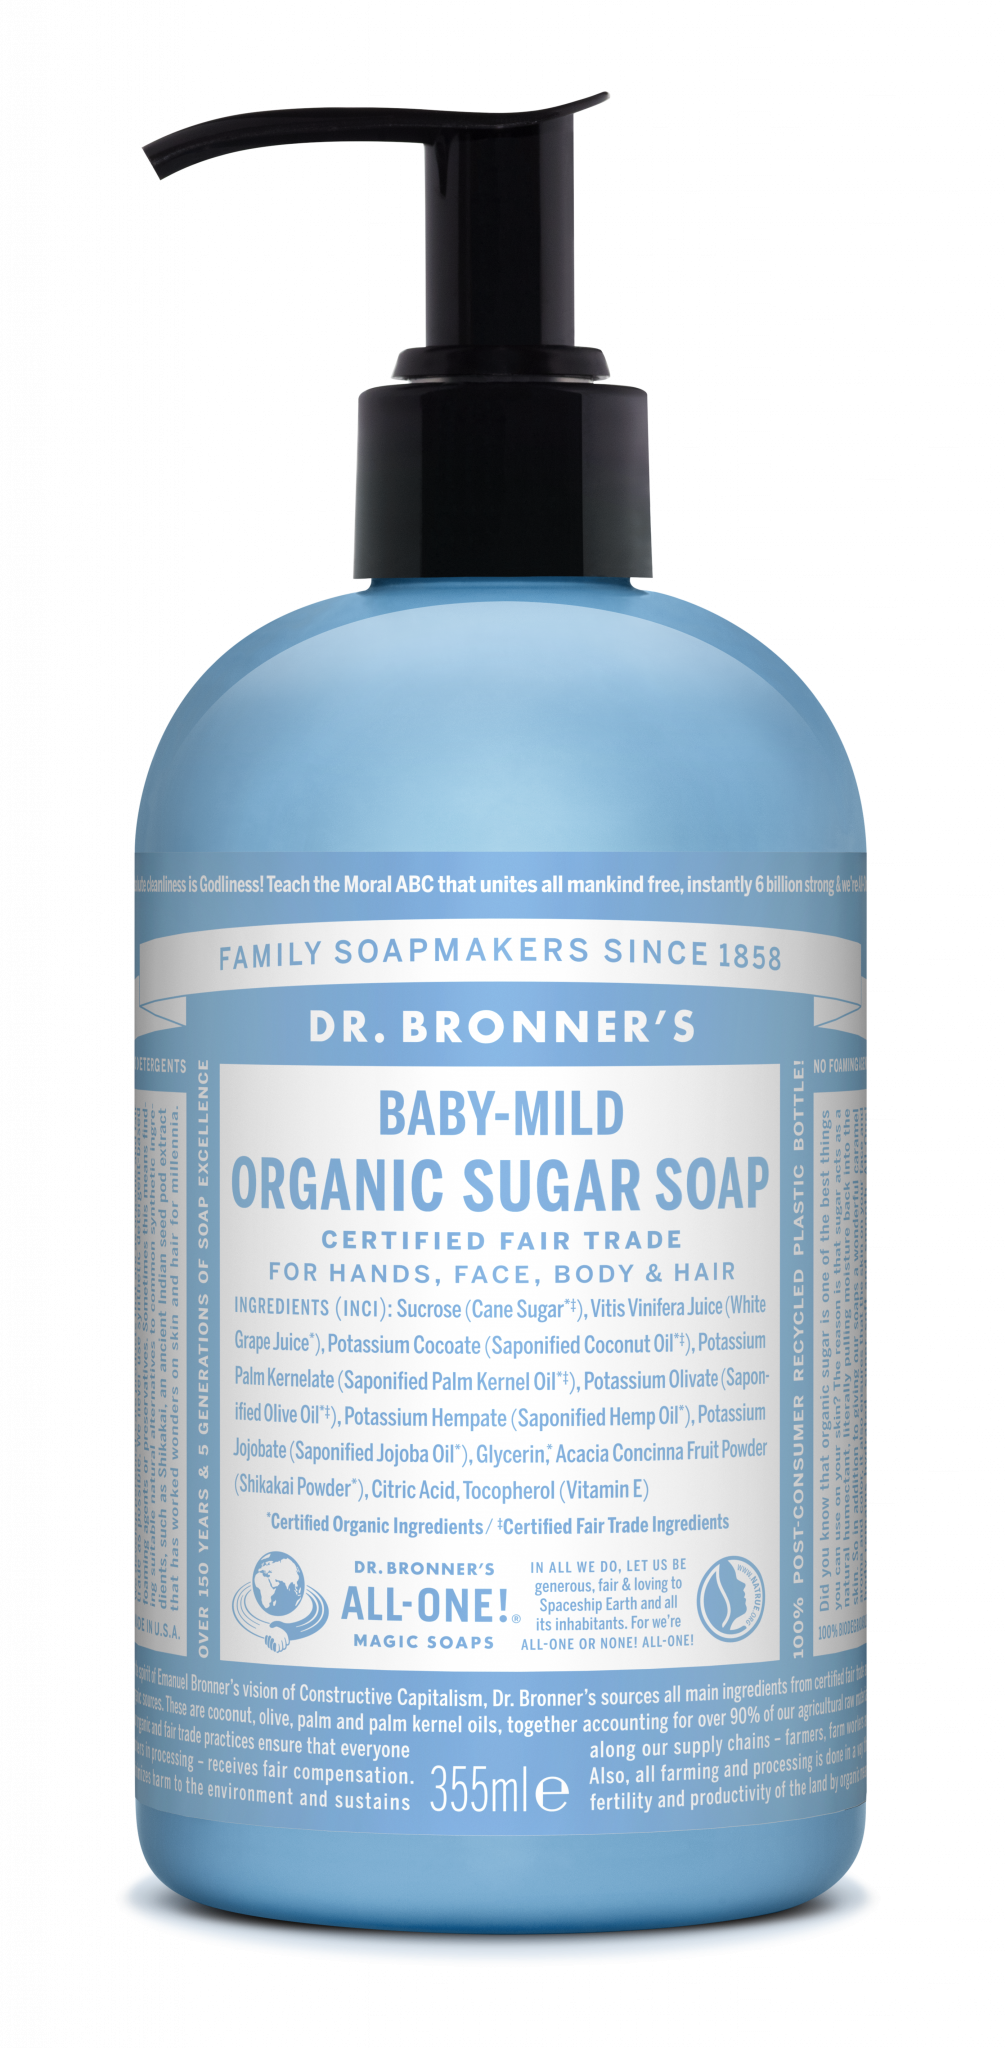 I swear by Dr. Bronner’s organic baby-mild and honestly it’s all you need